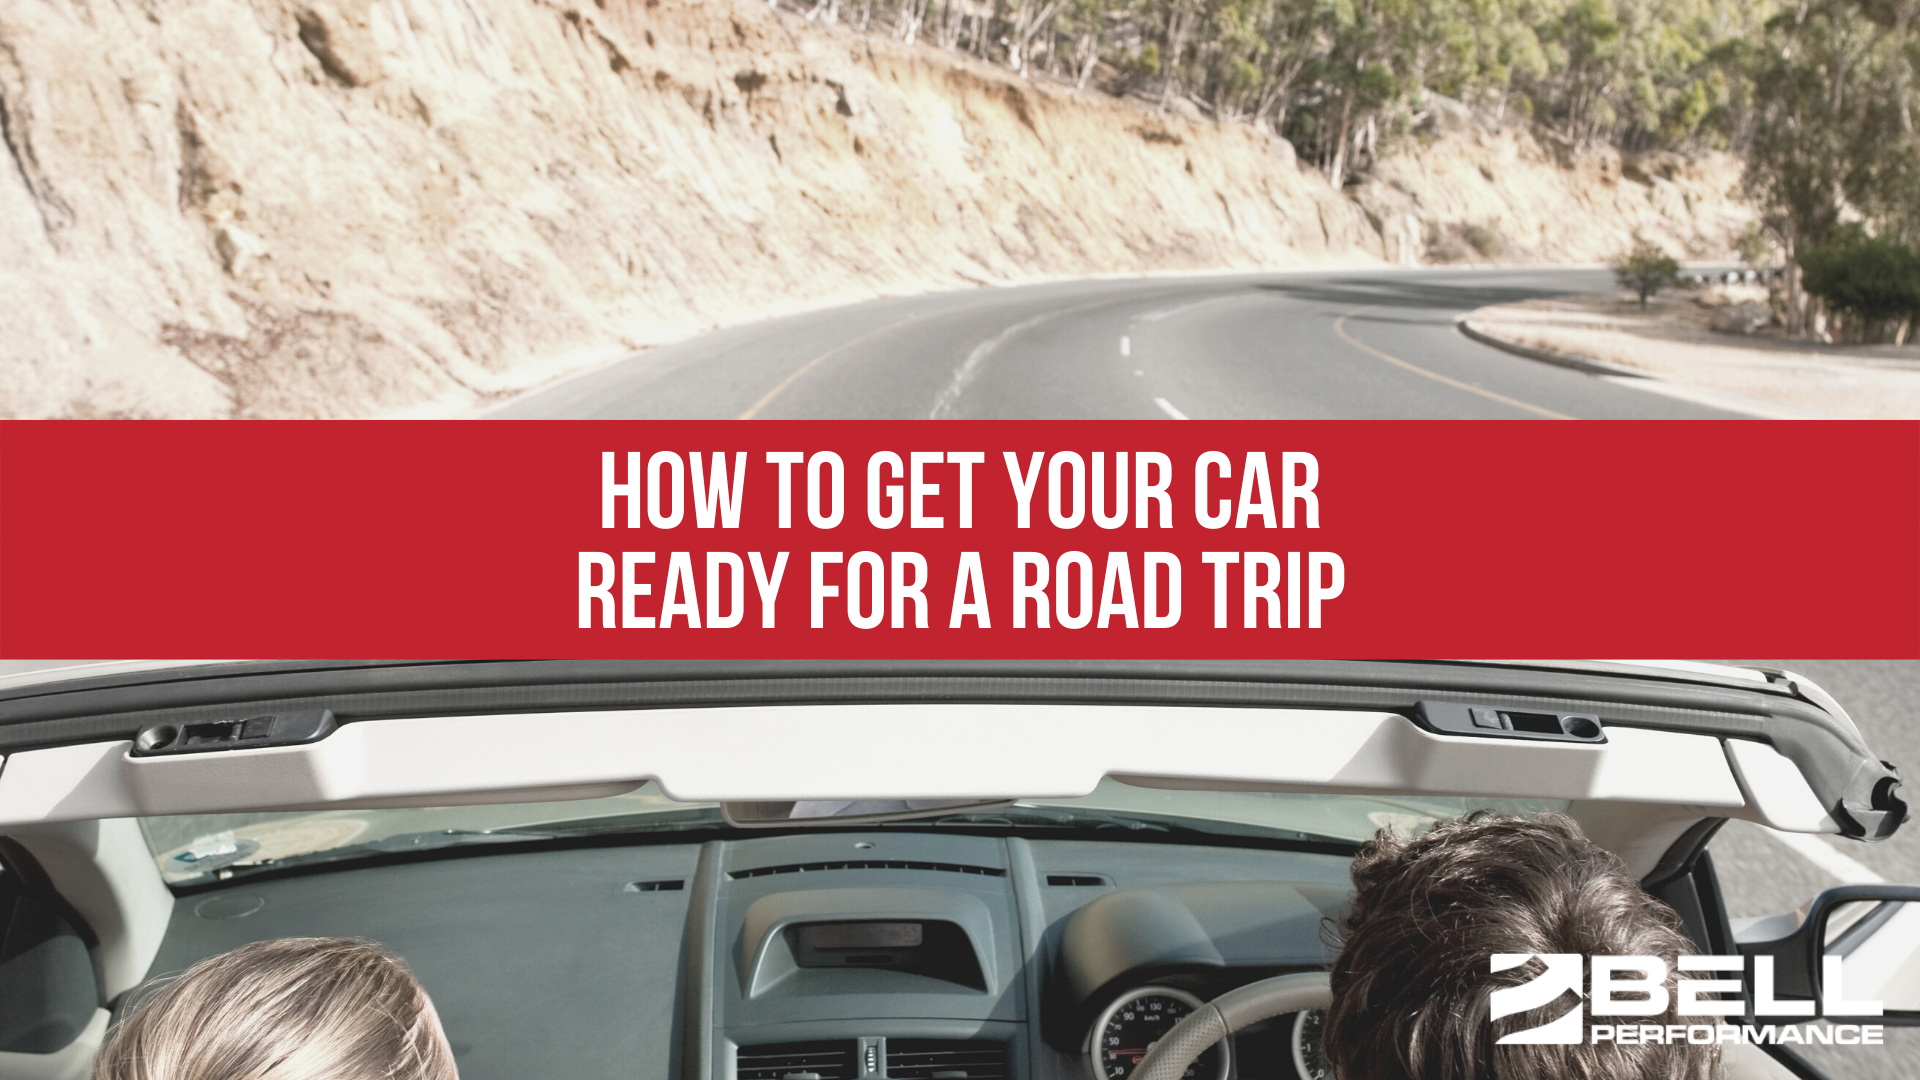 How to get your car ready for a road trip